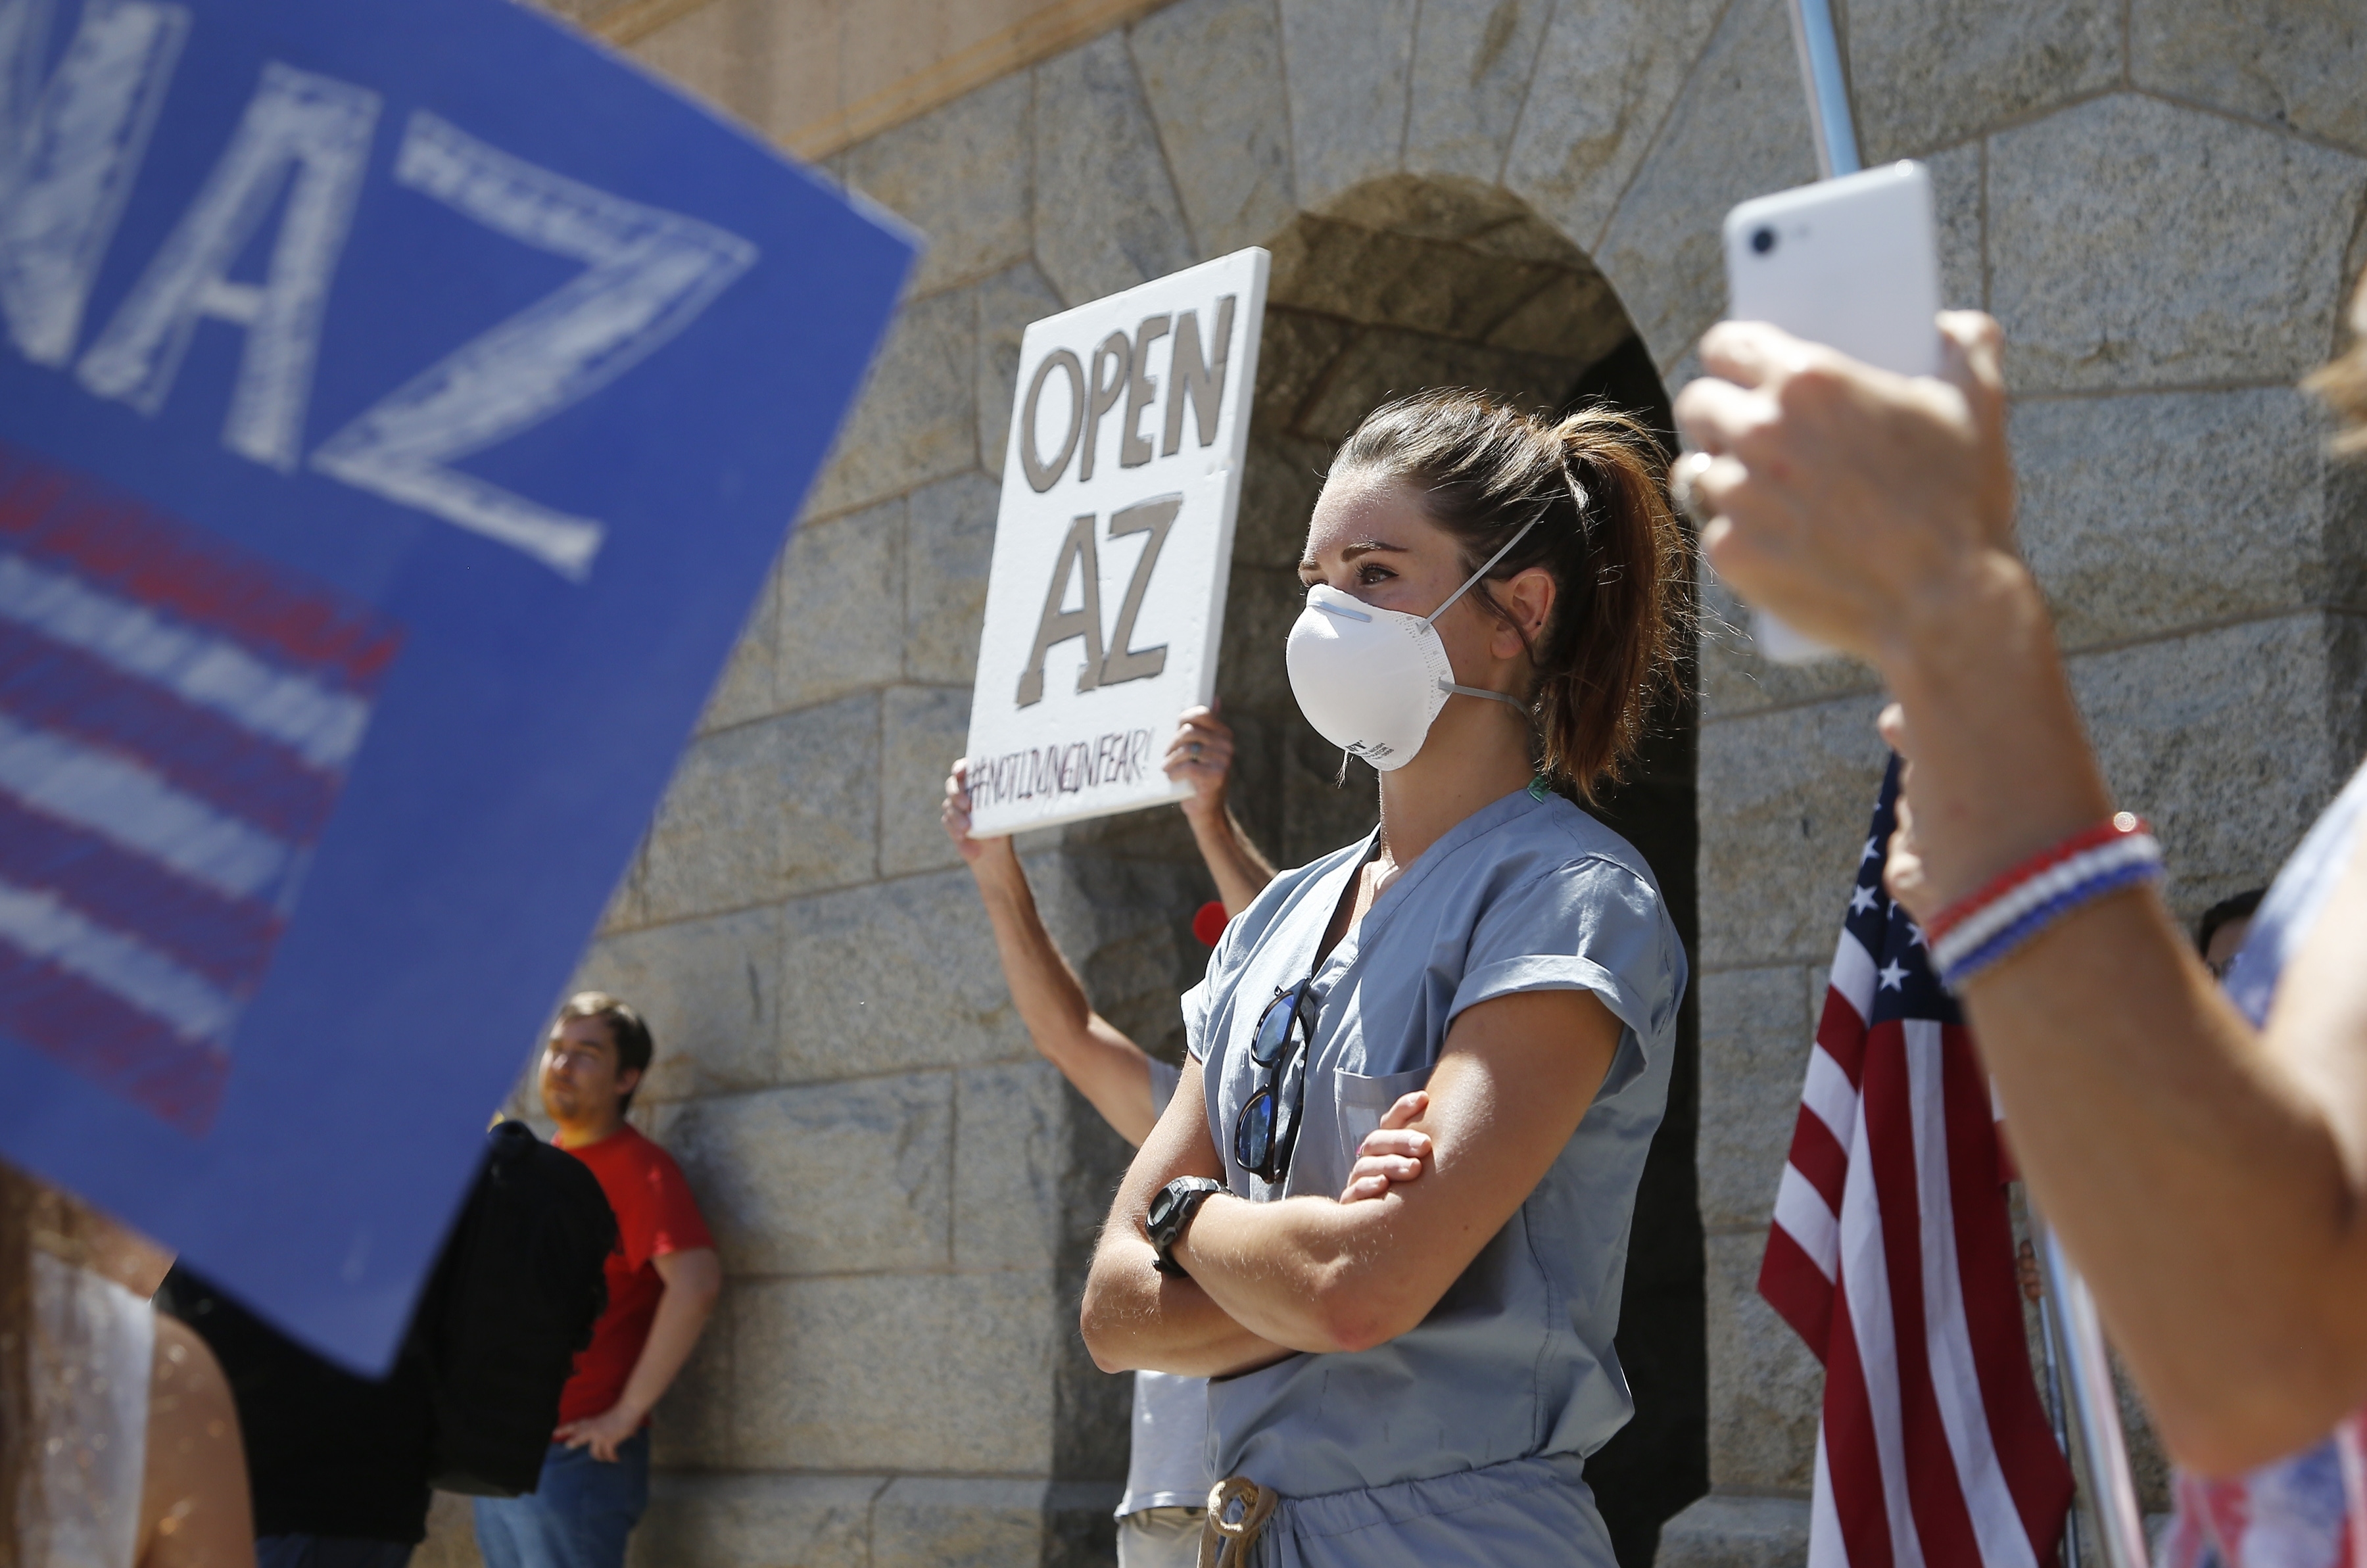 A caregiver stands in front of the Arizona Capitol as protesters surround her at a rally to 're-open' Arizona against the governor's stay-at-home order due to the coronavirus Monday, April 20, 2020, in Phoenix. (AP Photo/Ross D. Franklin)